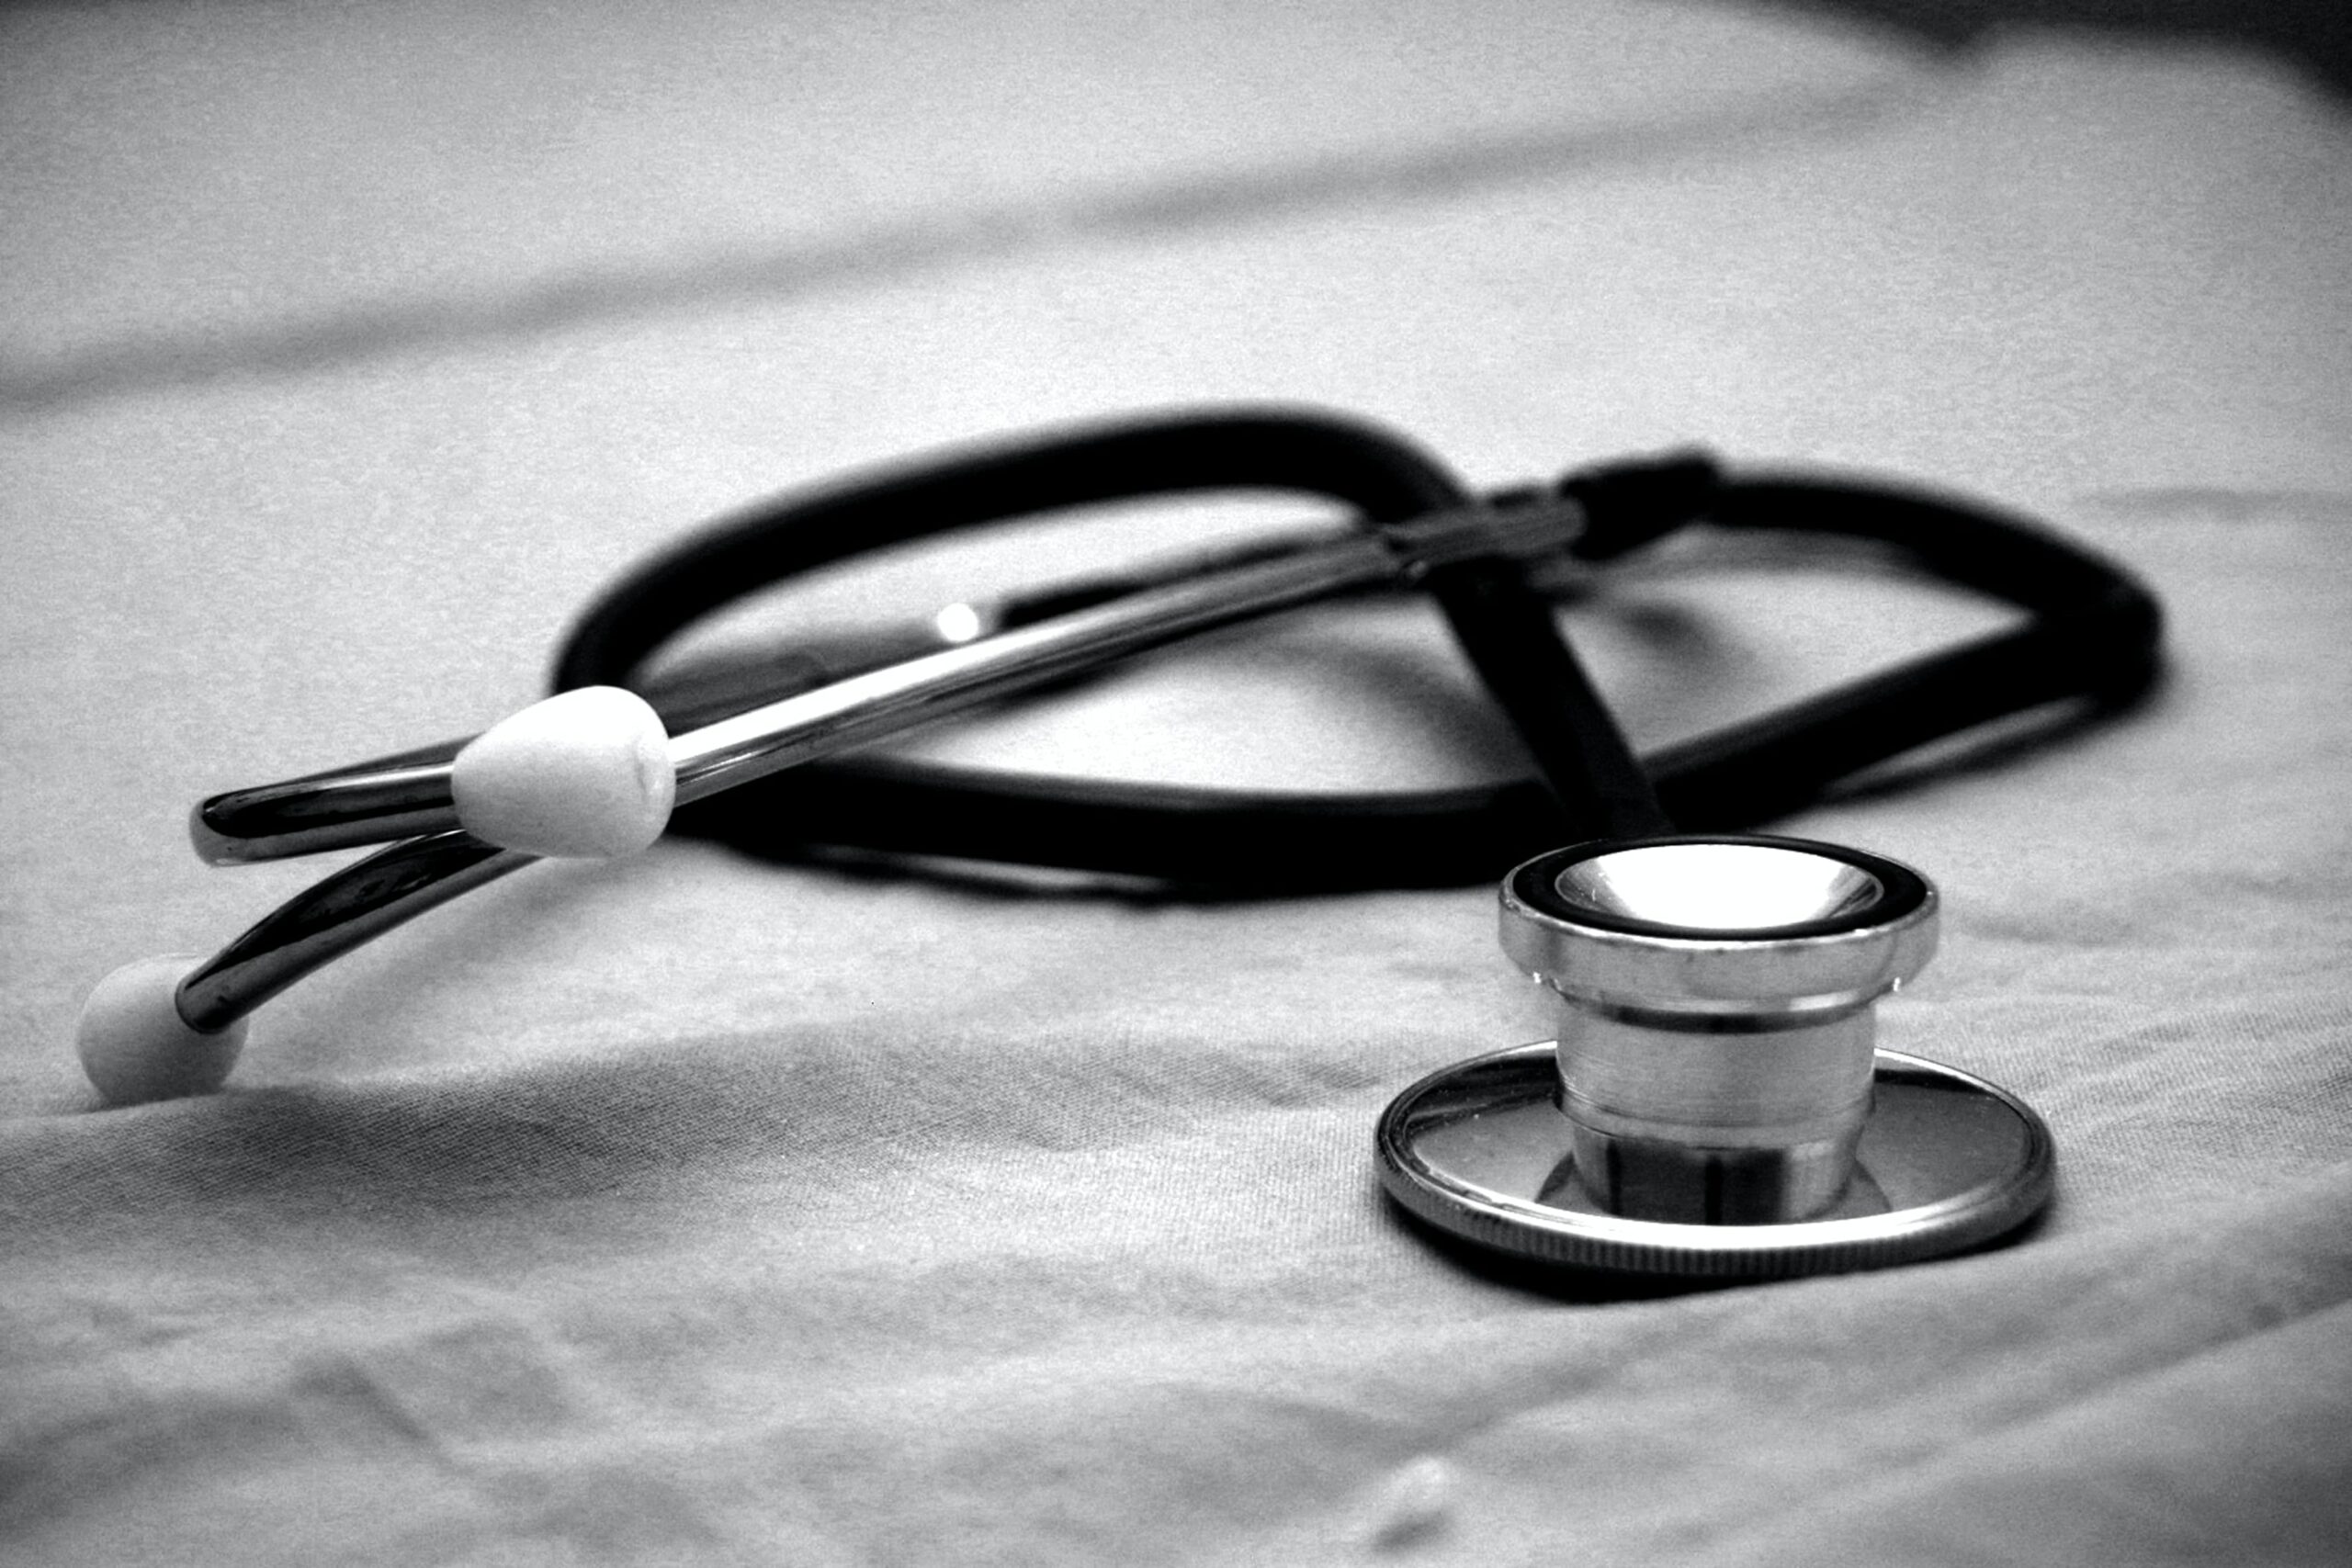 A black and white image of a stethoscope